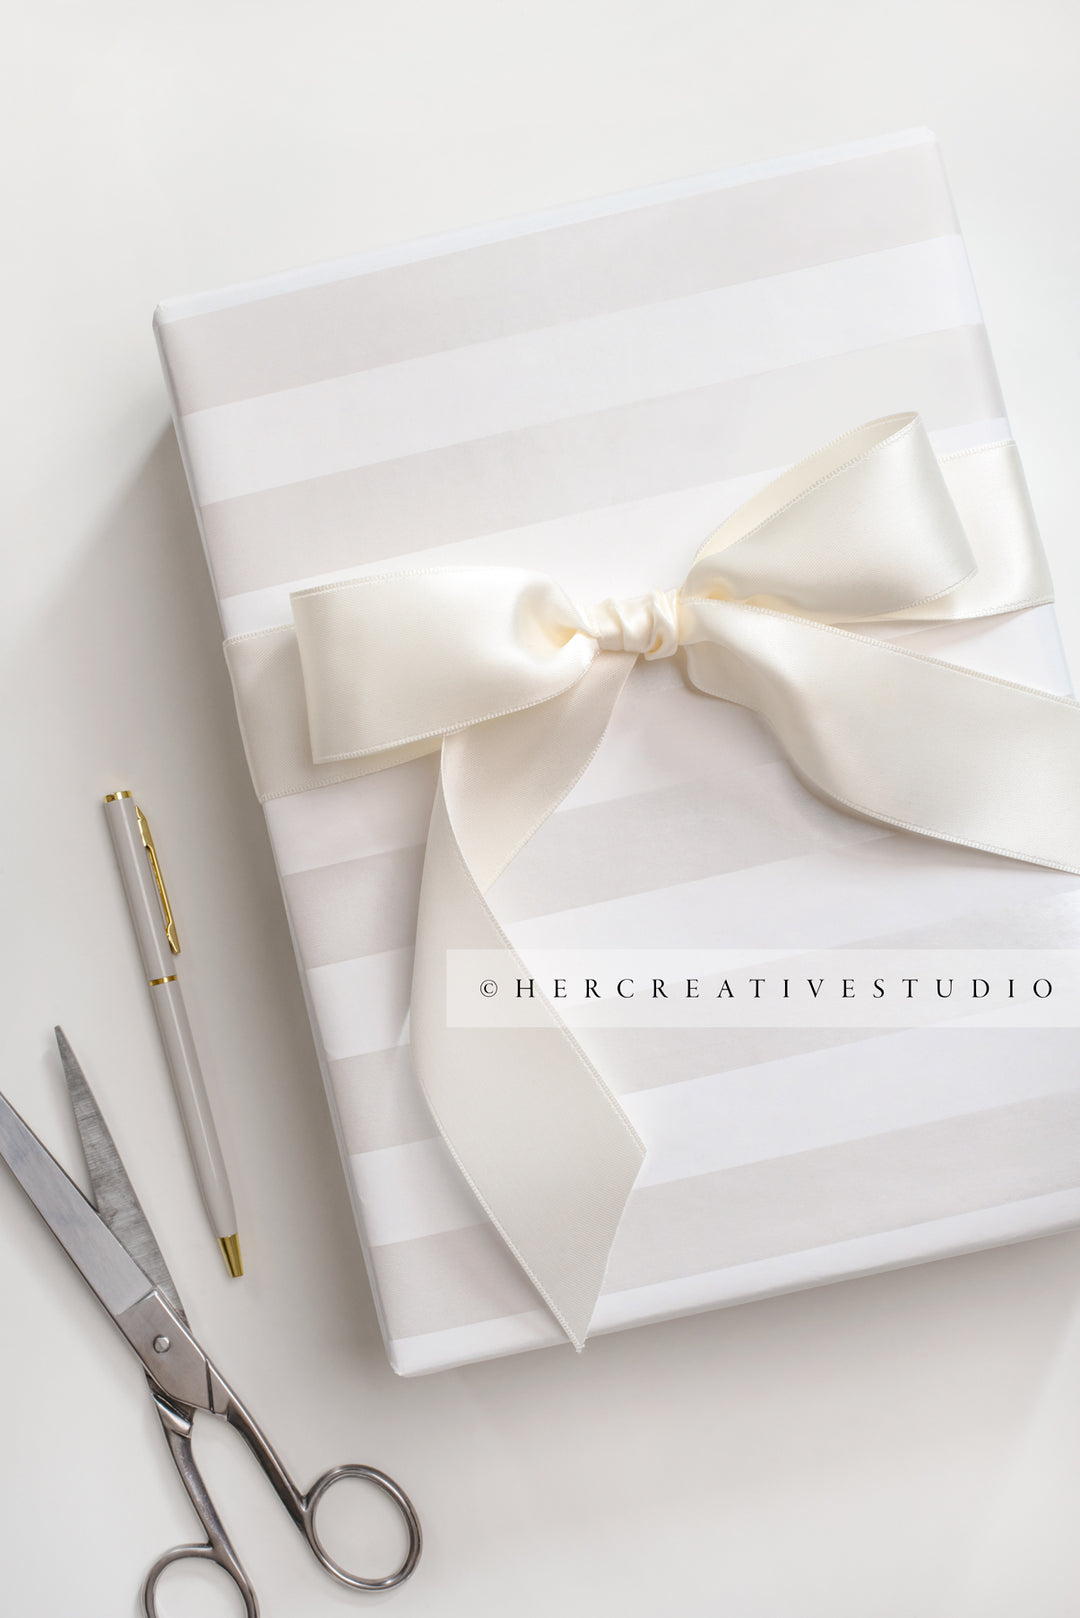 Gifts with Stripes & Scissors on White Background, Stock Image